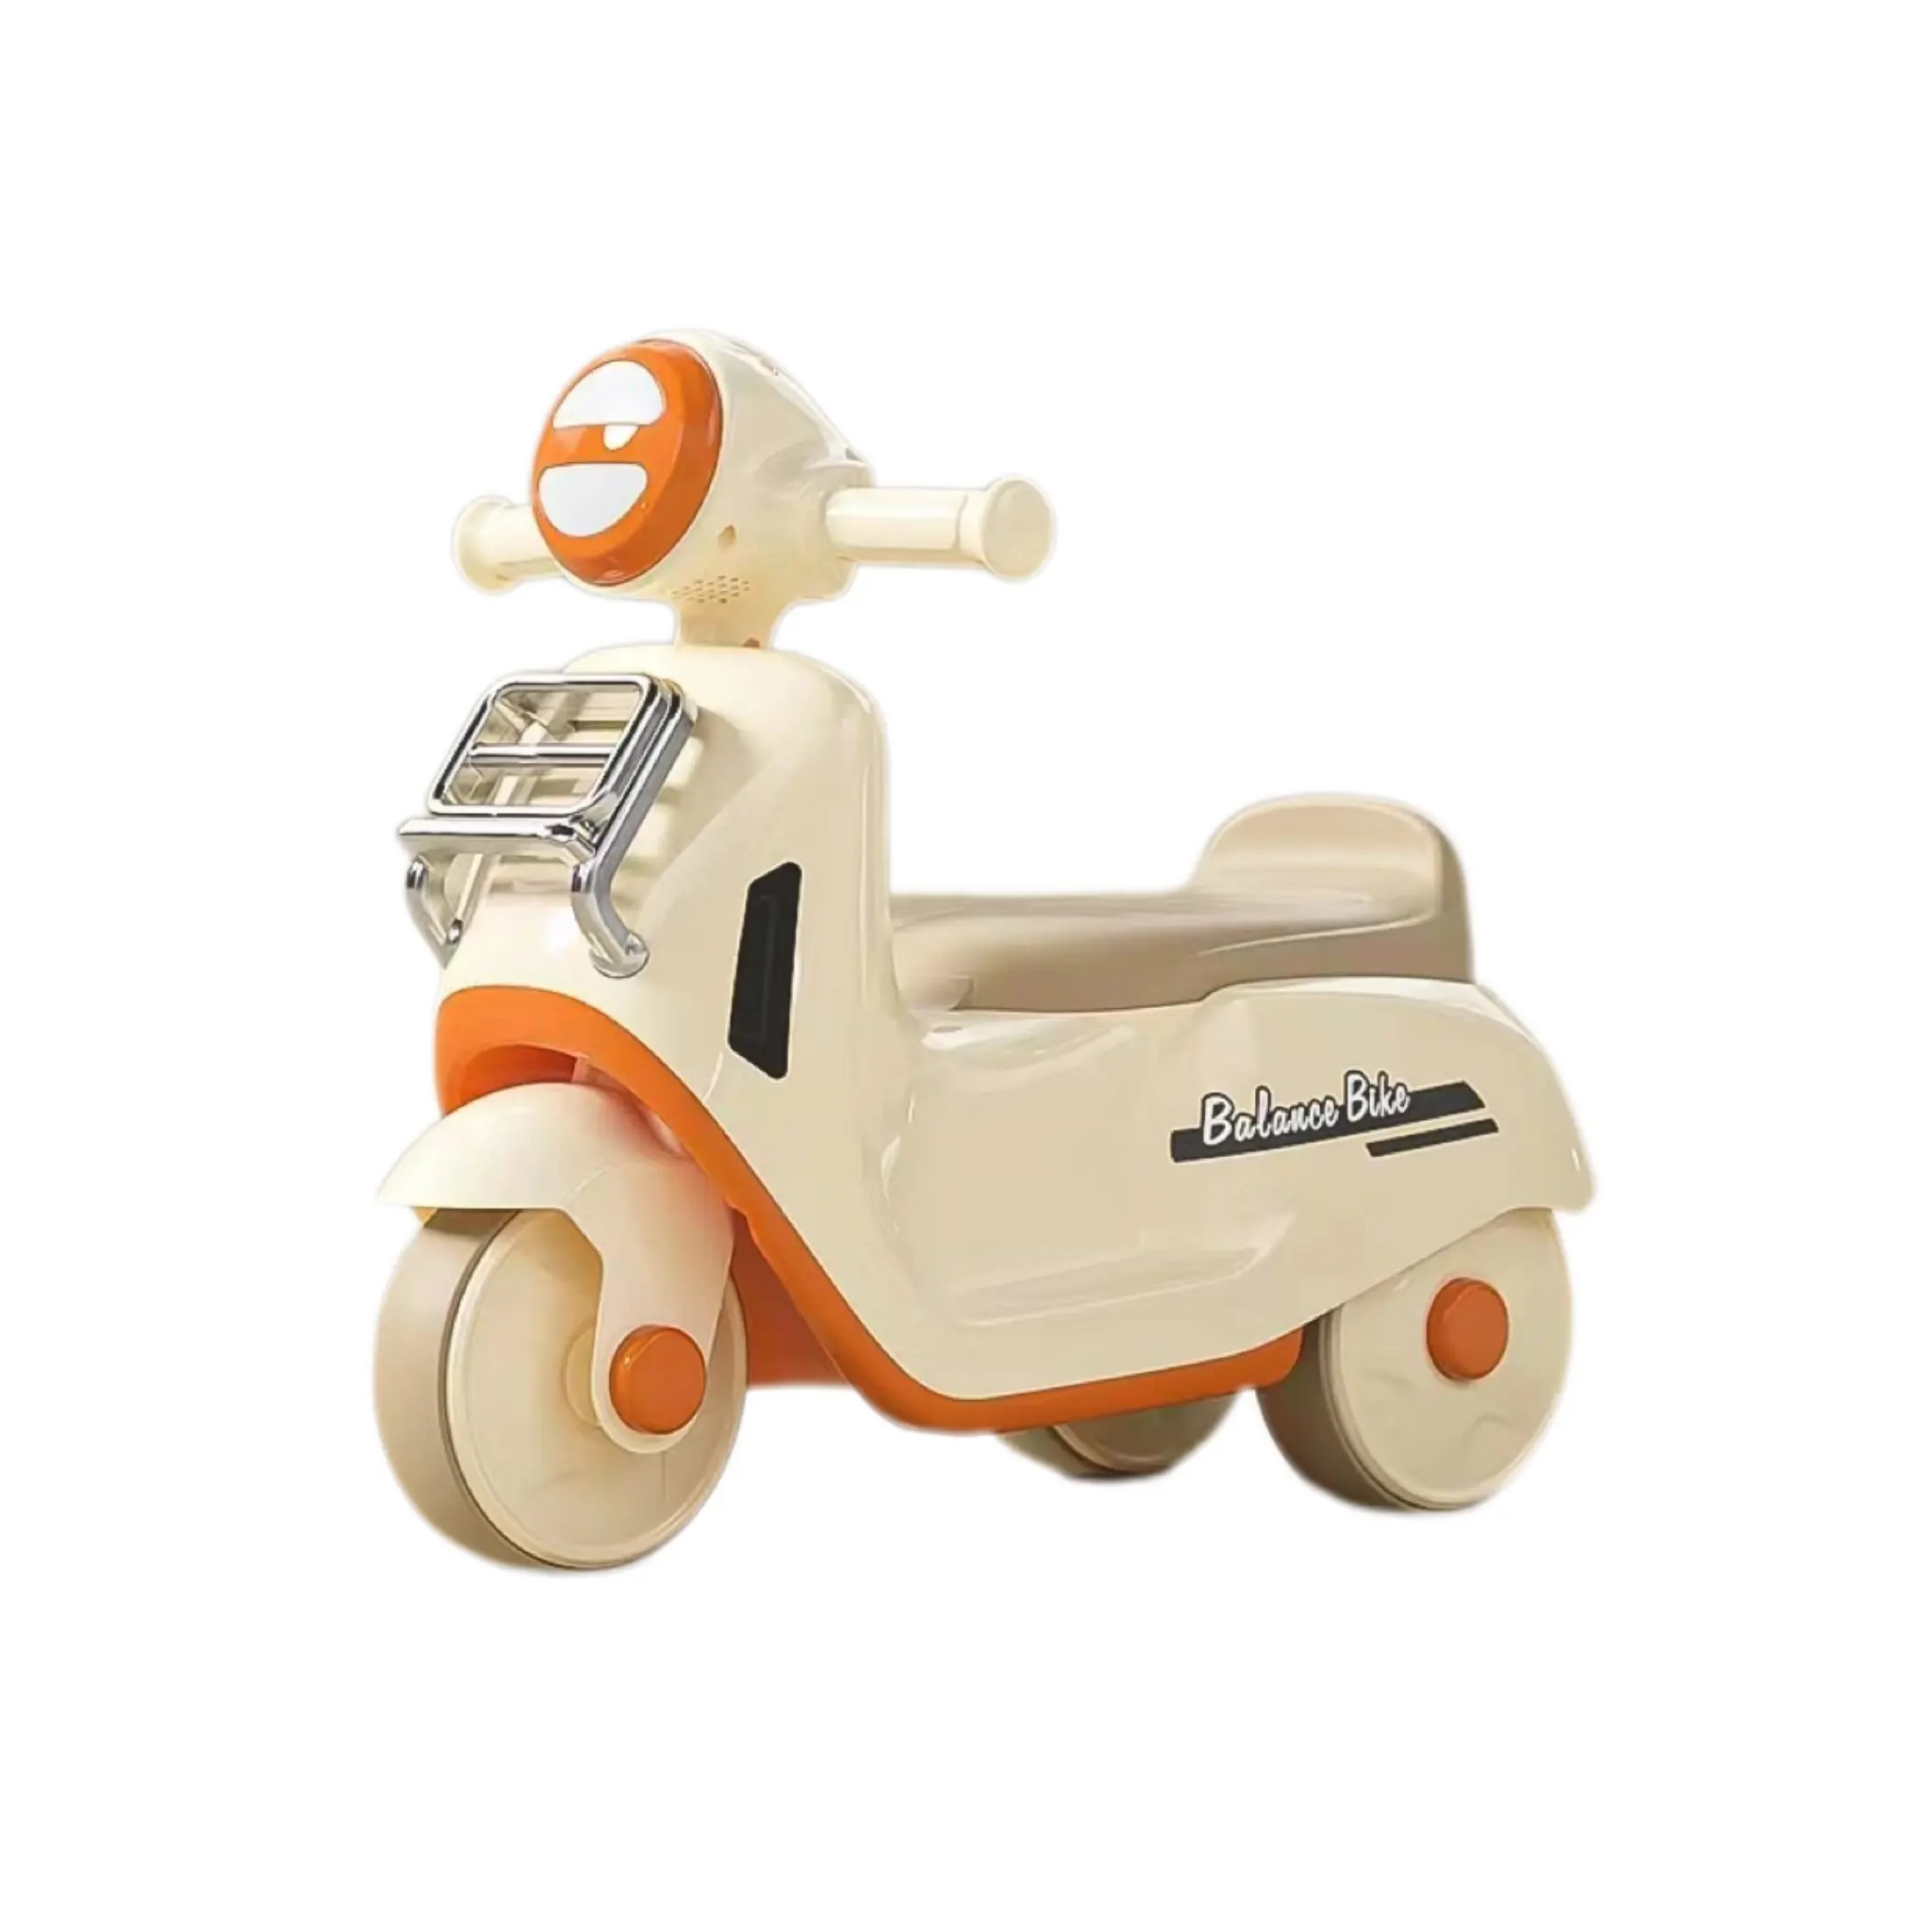 New Children's Walker Fall Prevention 1-3 Year-Old Baby Three-Wheel Balance Car Toys Cute Children's Toy Car